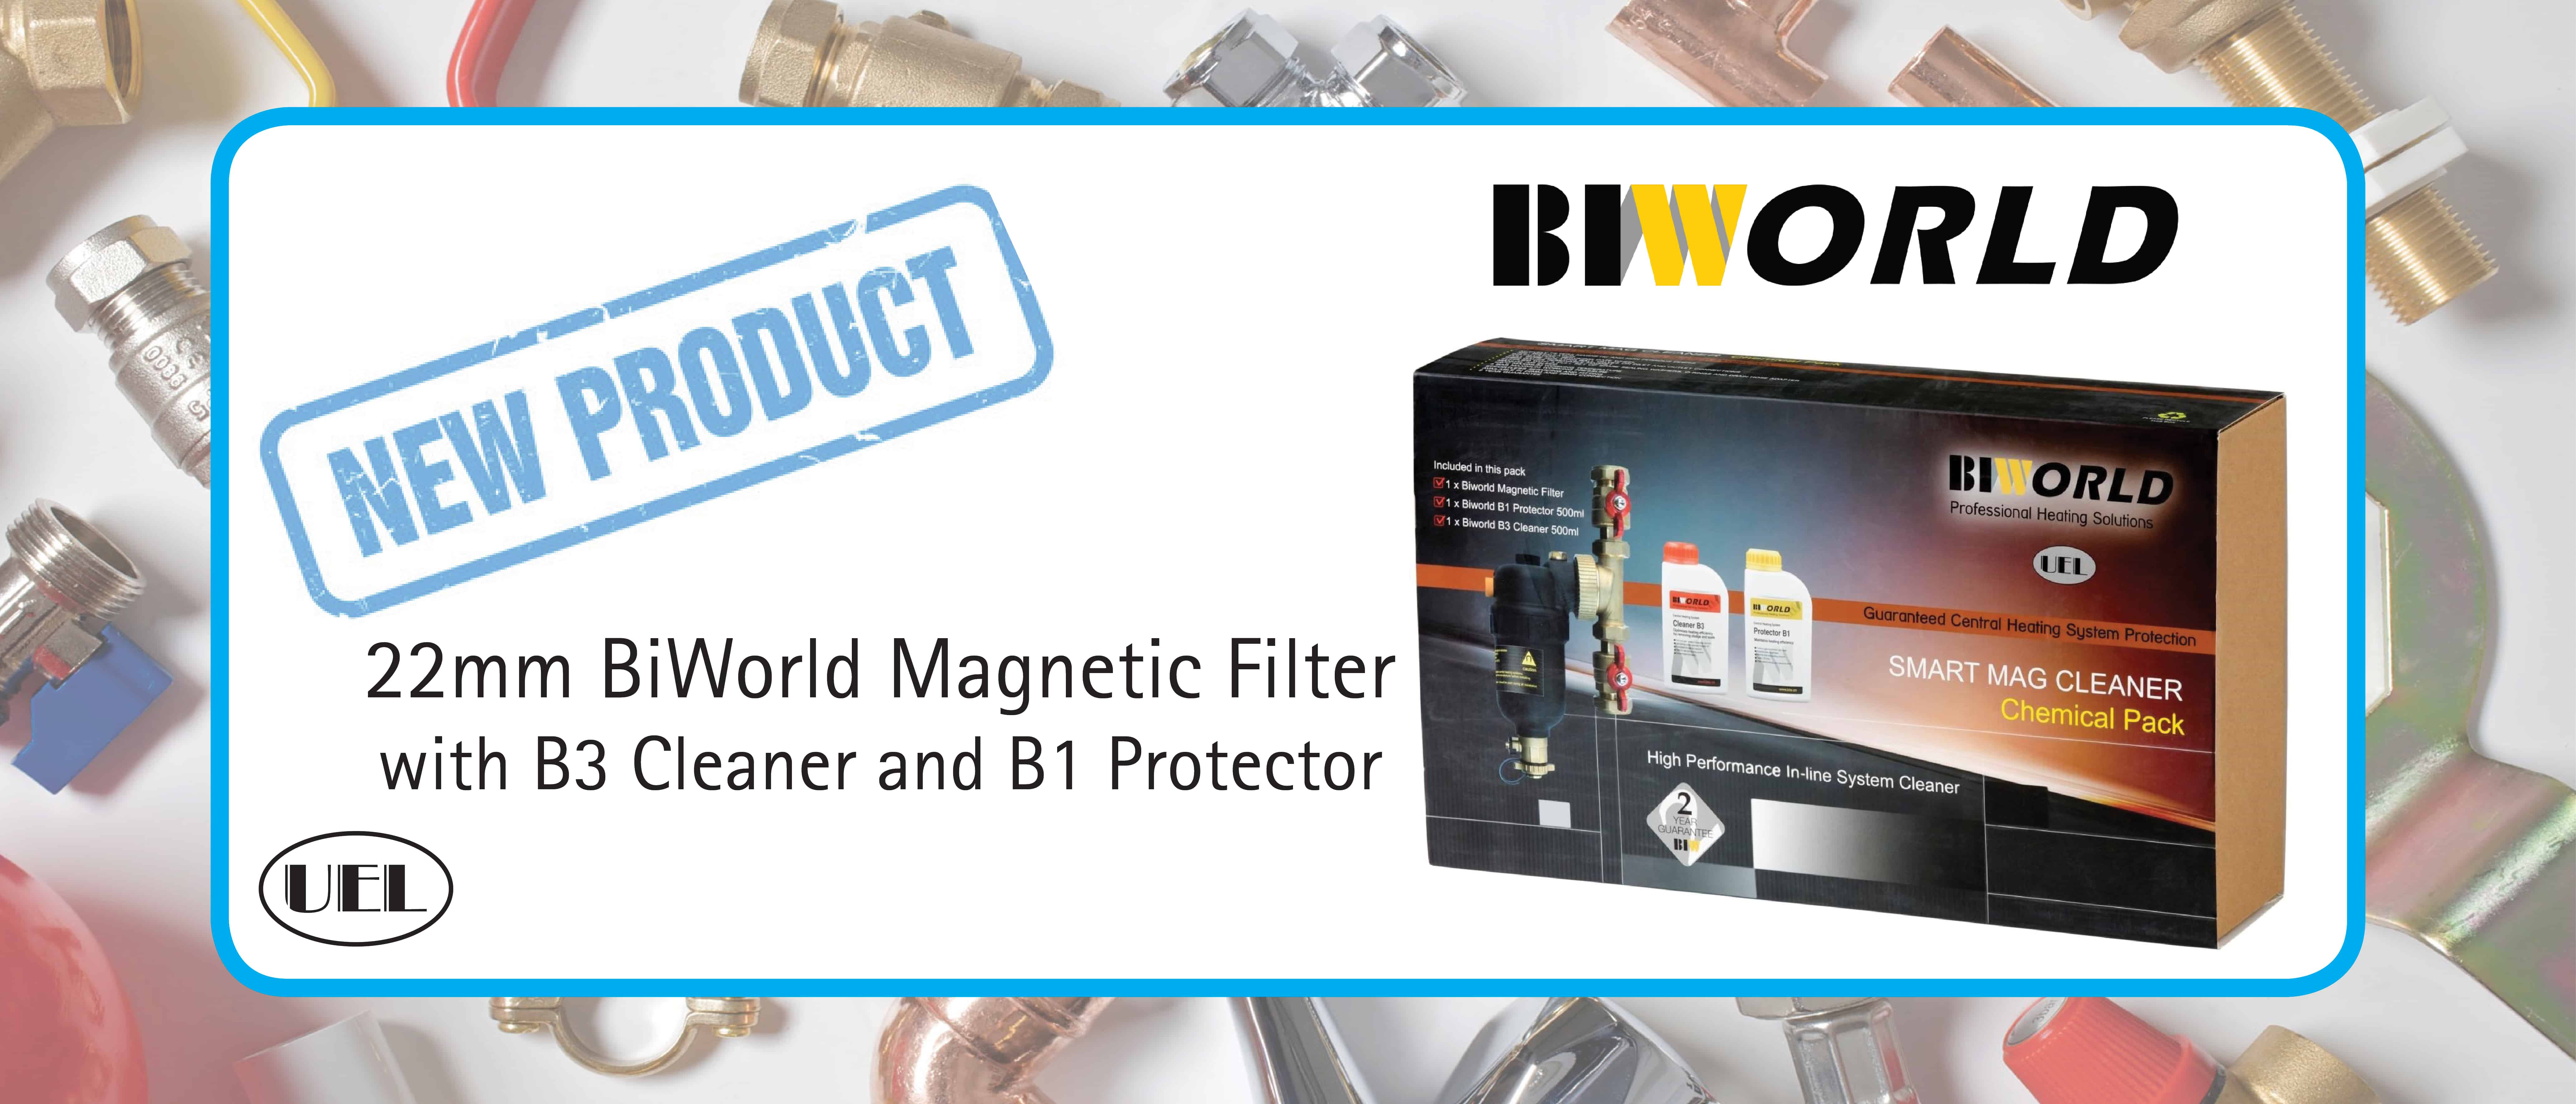 New Product Alert – 22mm BiWorld Magnetic Filter with B3 Cleaner and B1 Protector